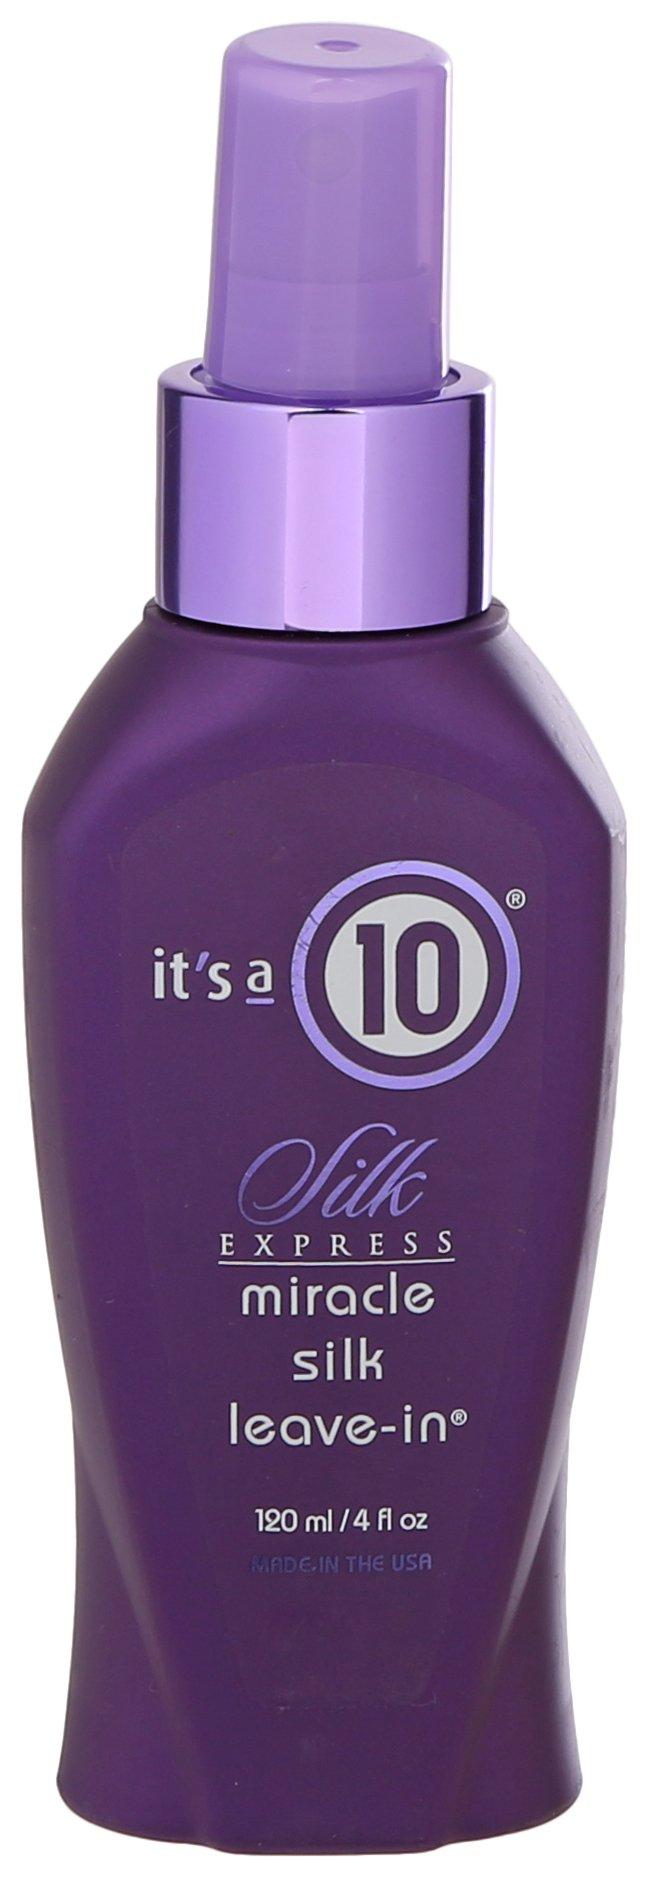 4 Fl.Oz. Express Miracle Silk Leave-In